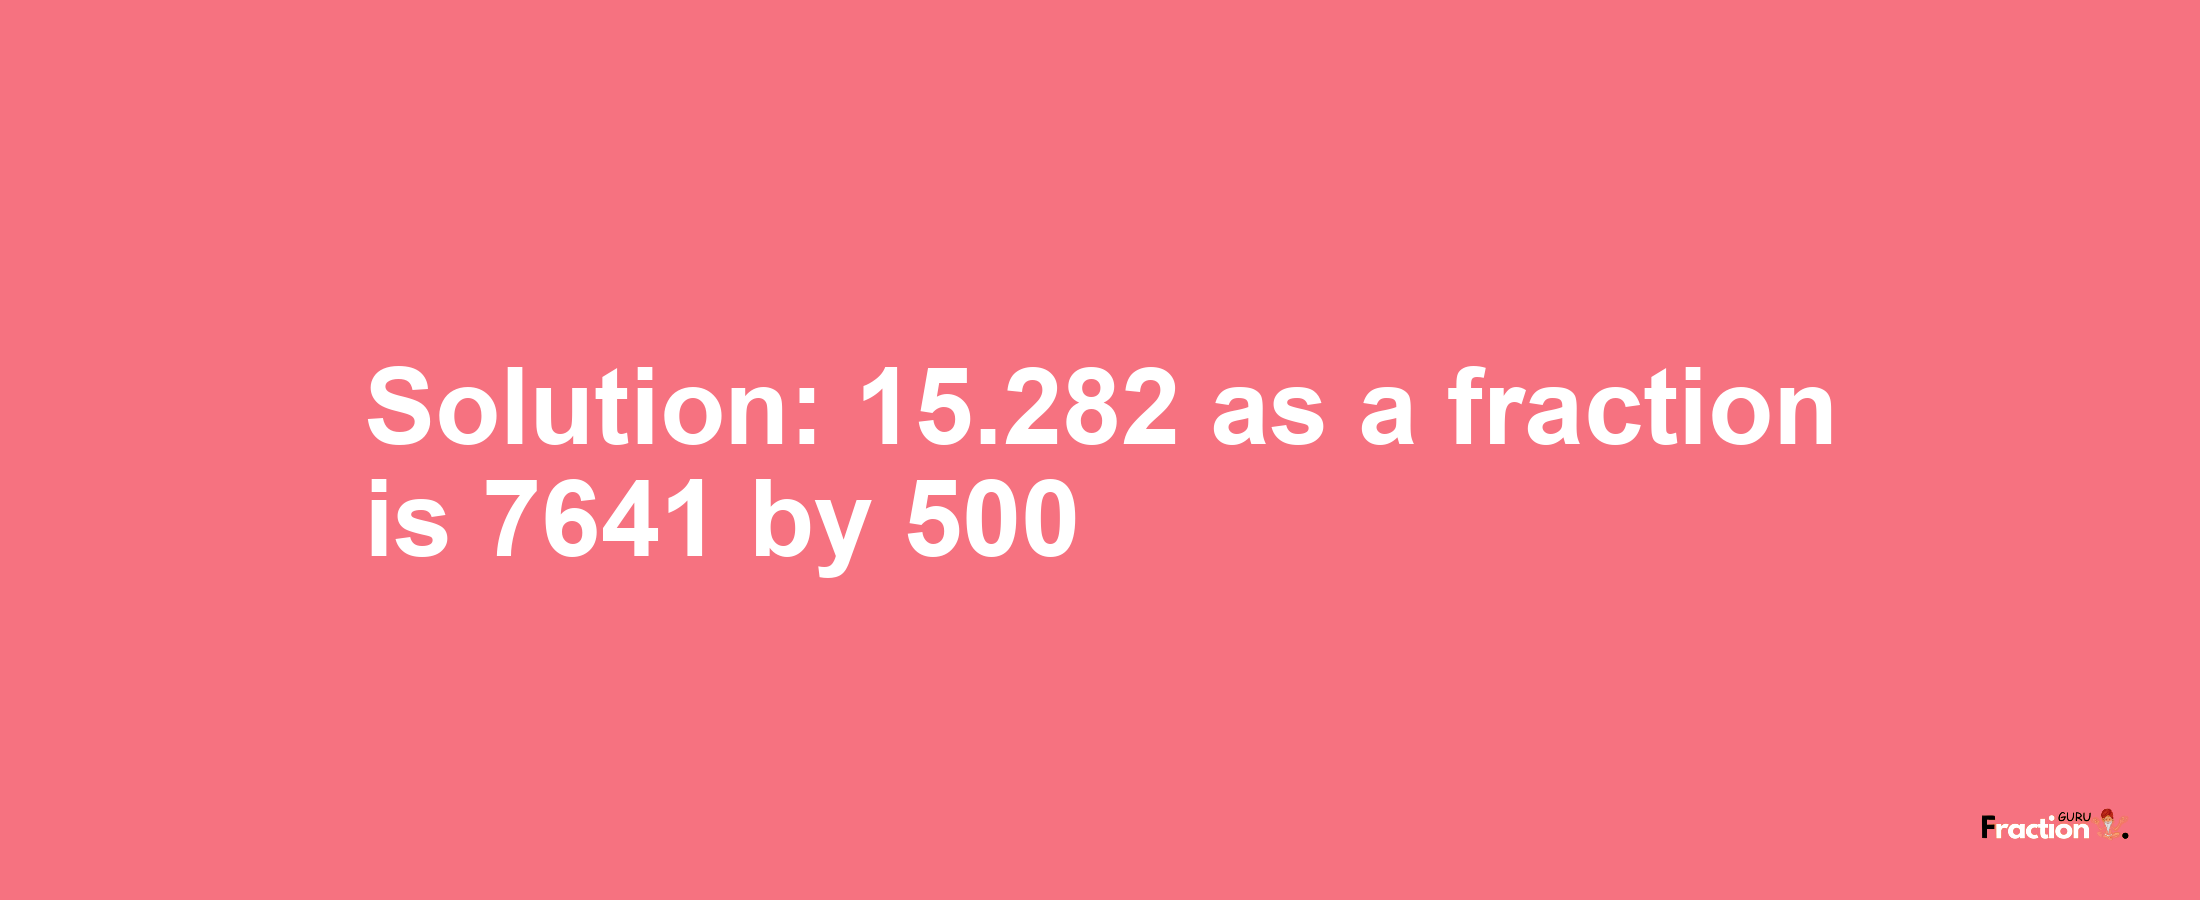 Solution:15.282 as a fraction is 7641/500